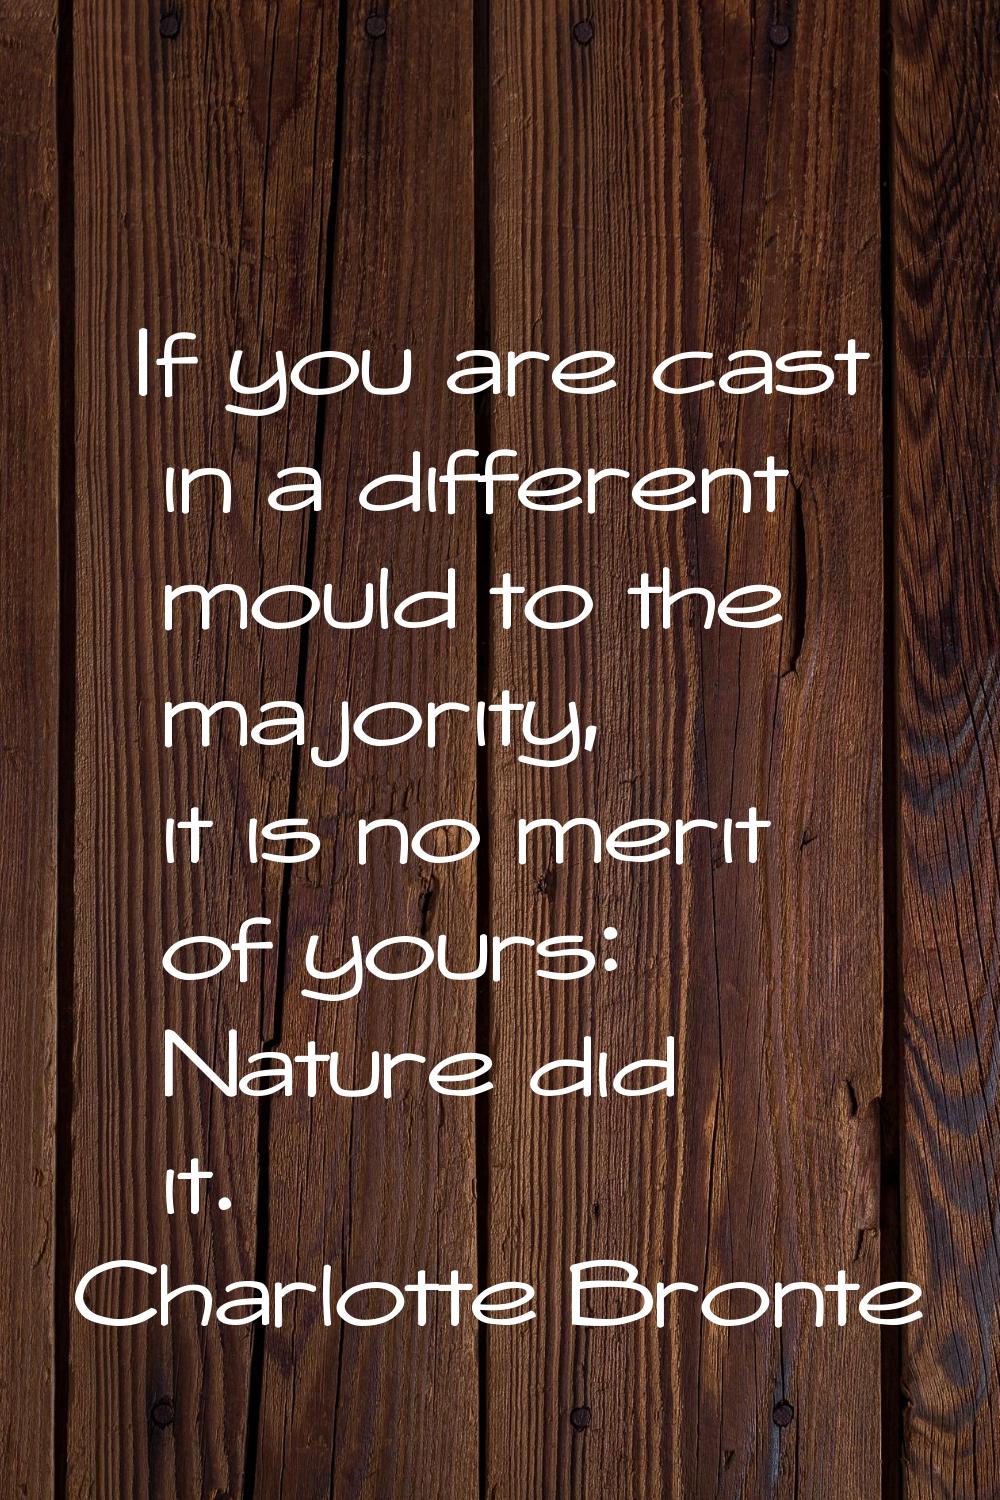 If you are cast in a different mould to the majority, it is no merit of yours: Nature did it.